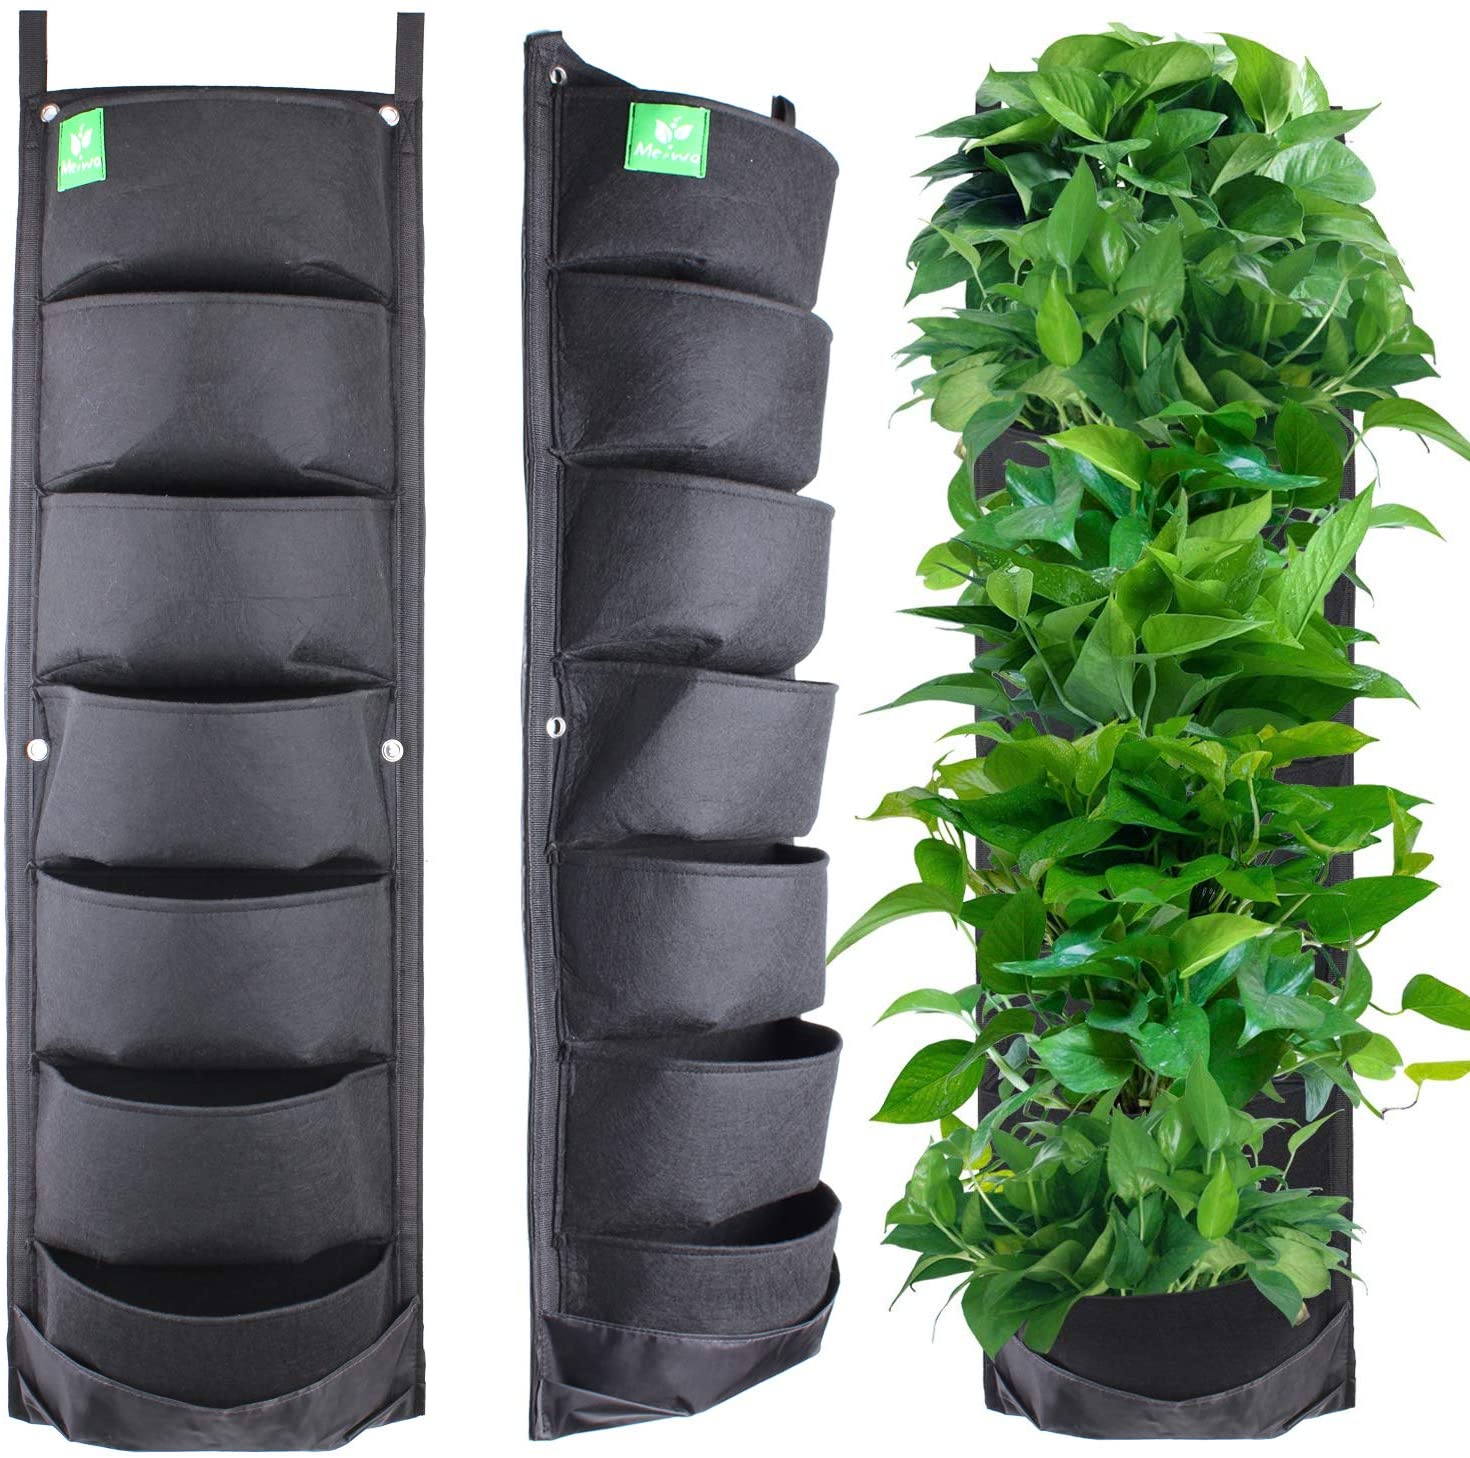 Meiwo New Upgraded Deeper and Bigger 7 Pocket Hanging Vertical Garden Wall Planter for Yard Garden Home Decoration